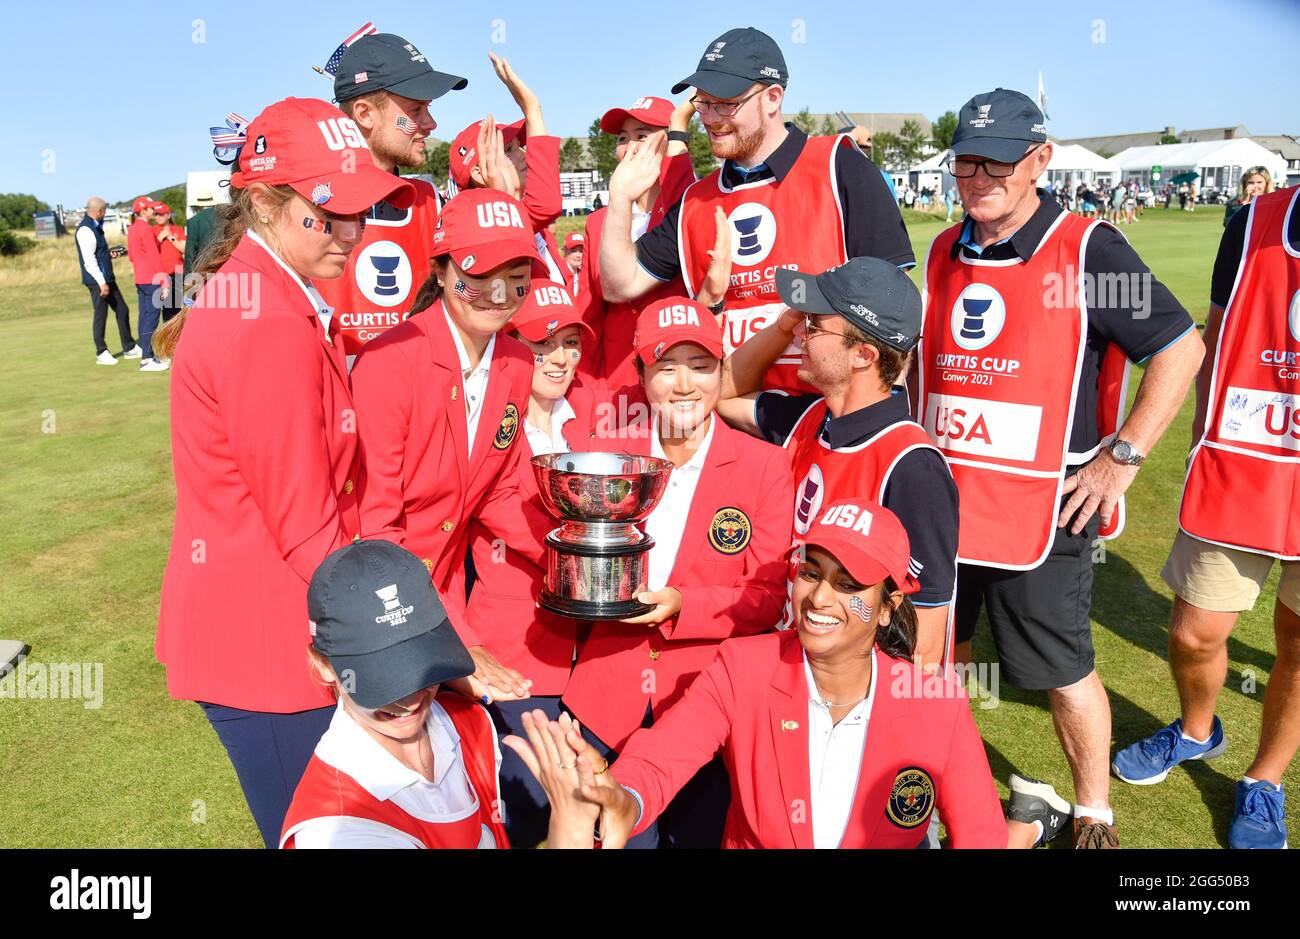 Team USA and their caddies pose for a TicToc selfie after winning the Curtis Cup 12.5 points to 7.5 points over Team GB&I after the 2021 Curtis Cup Da Stock Photo